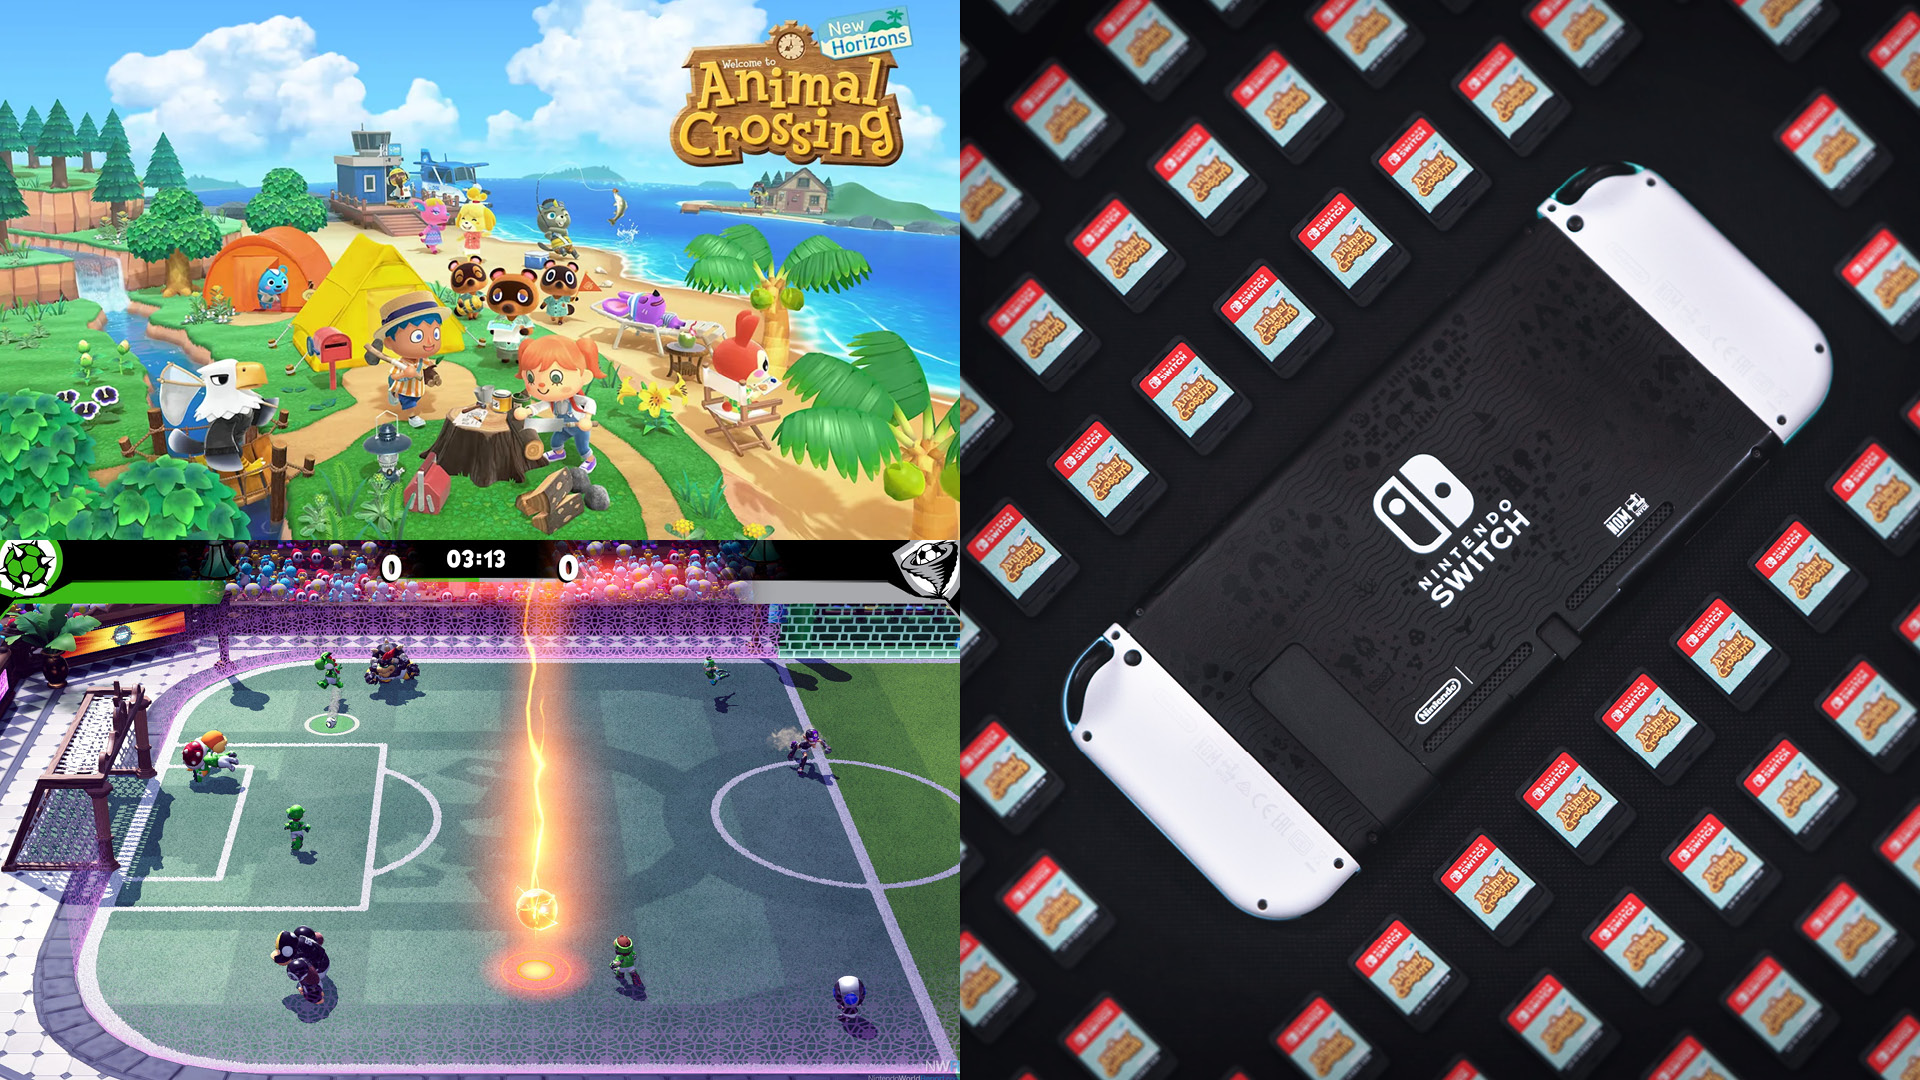 Top 25 Nintendo Switch 6-8 Player Co-op / Local Multiplayer Games - 2021  Edition 